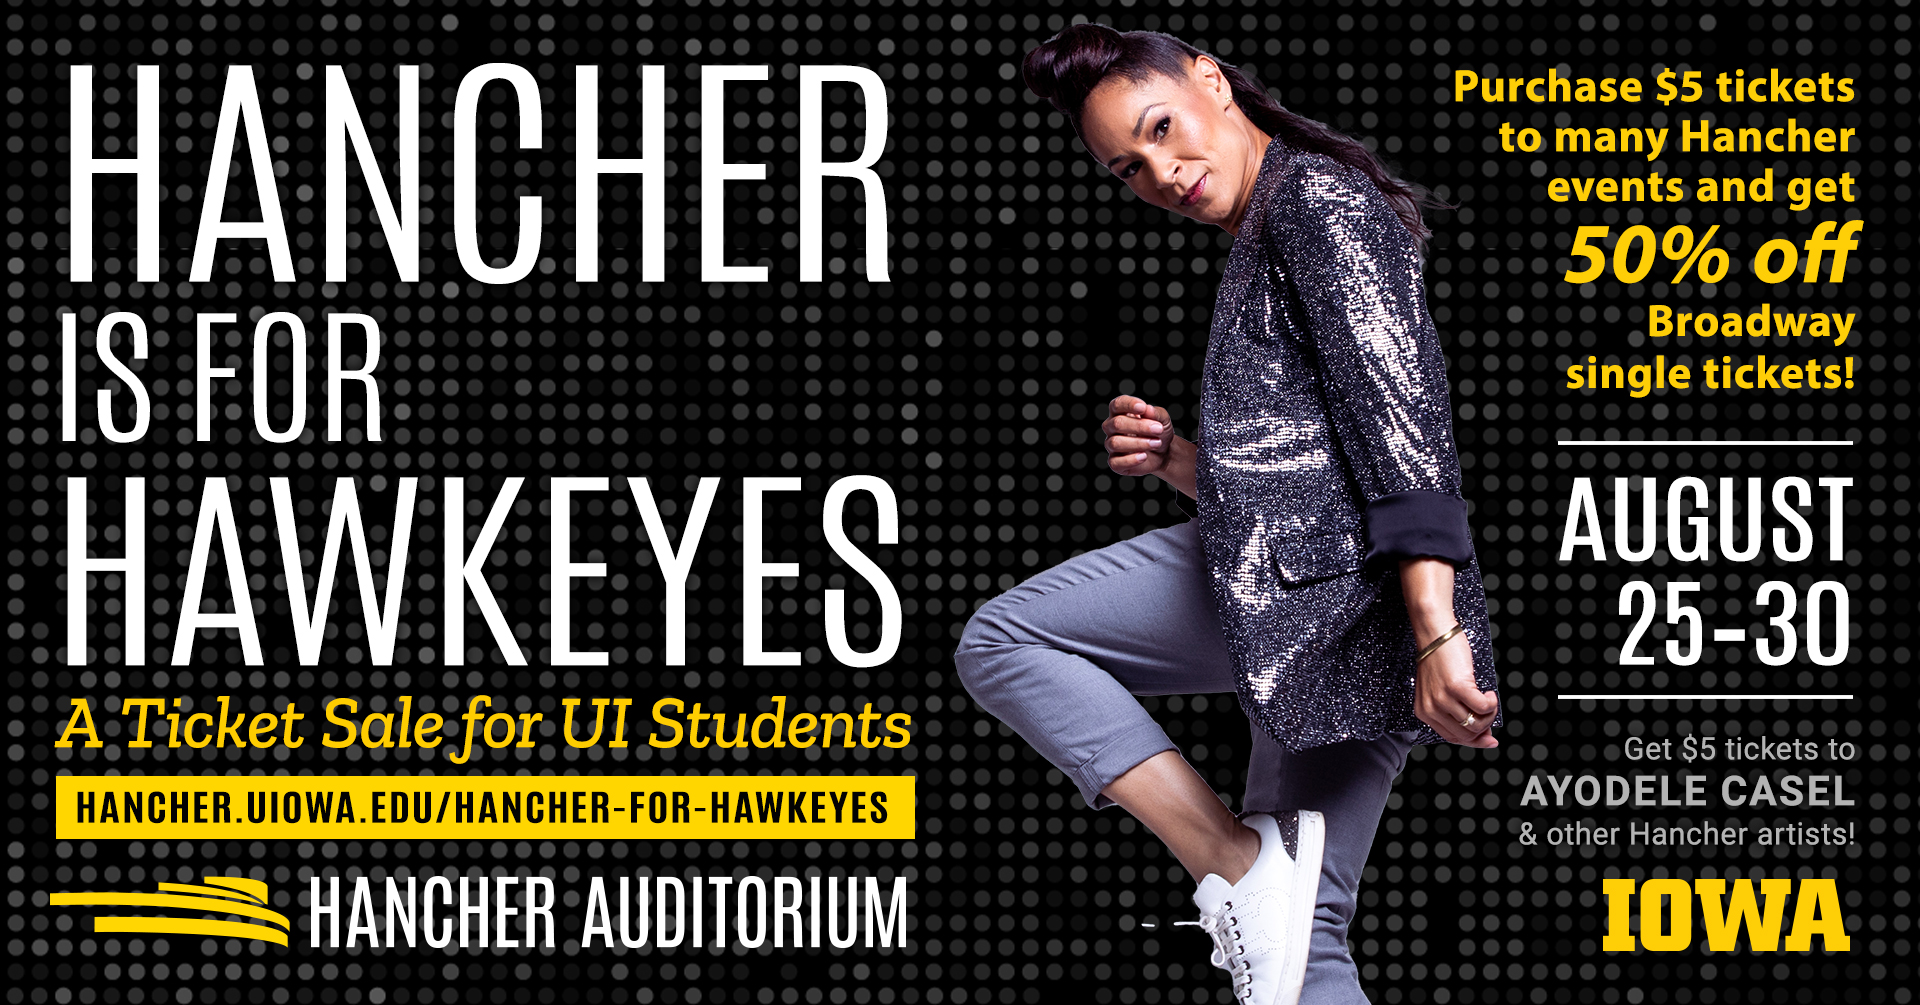 Hancher is for Hawkeyes! Student ticket sale ends on Aug 30